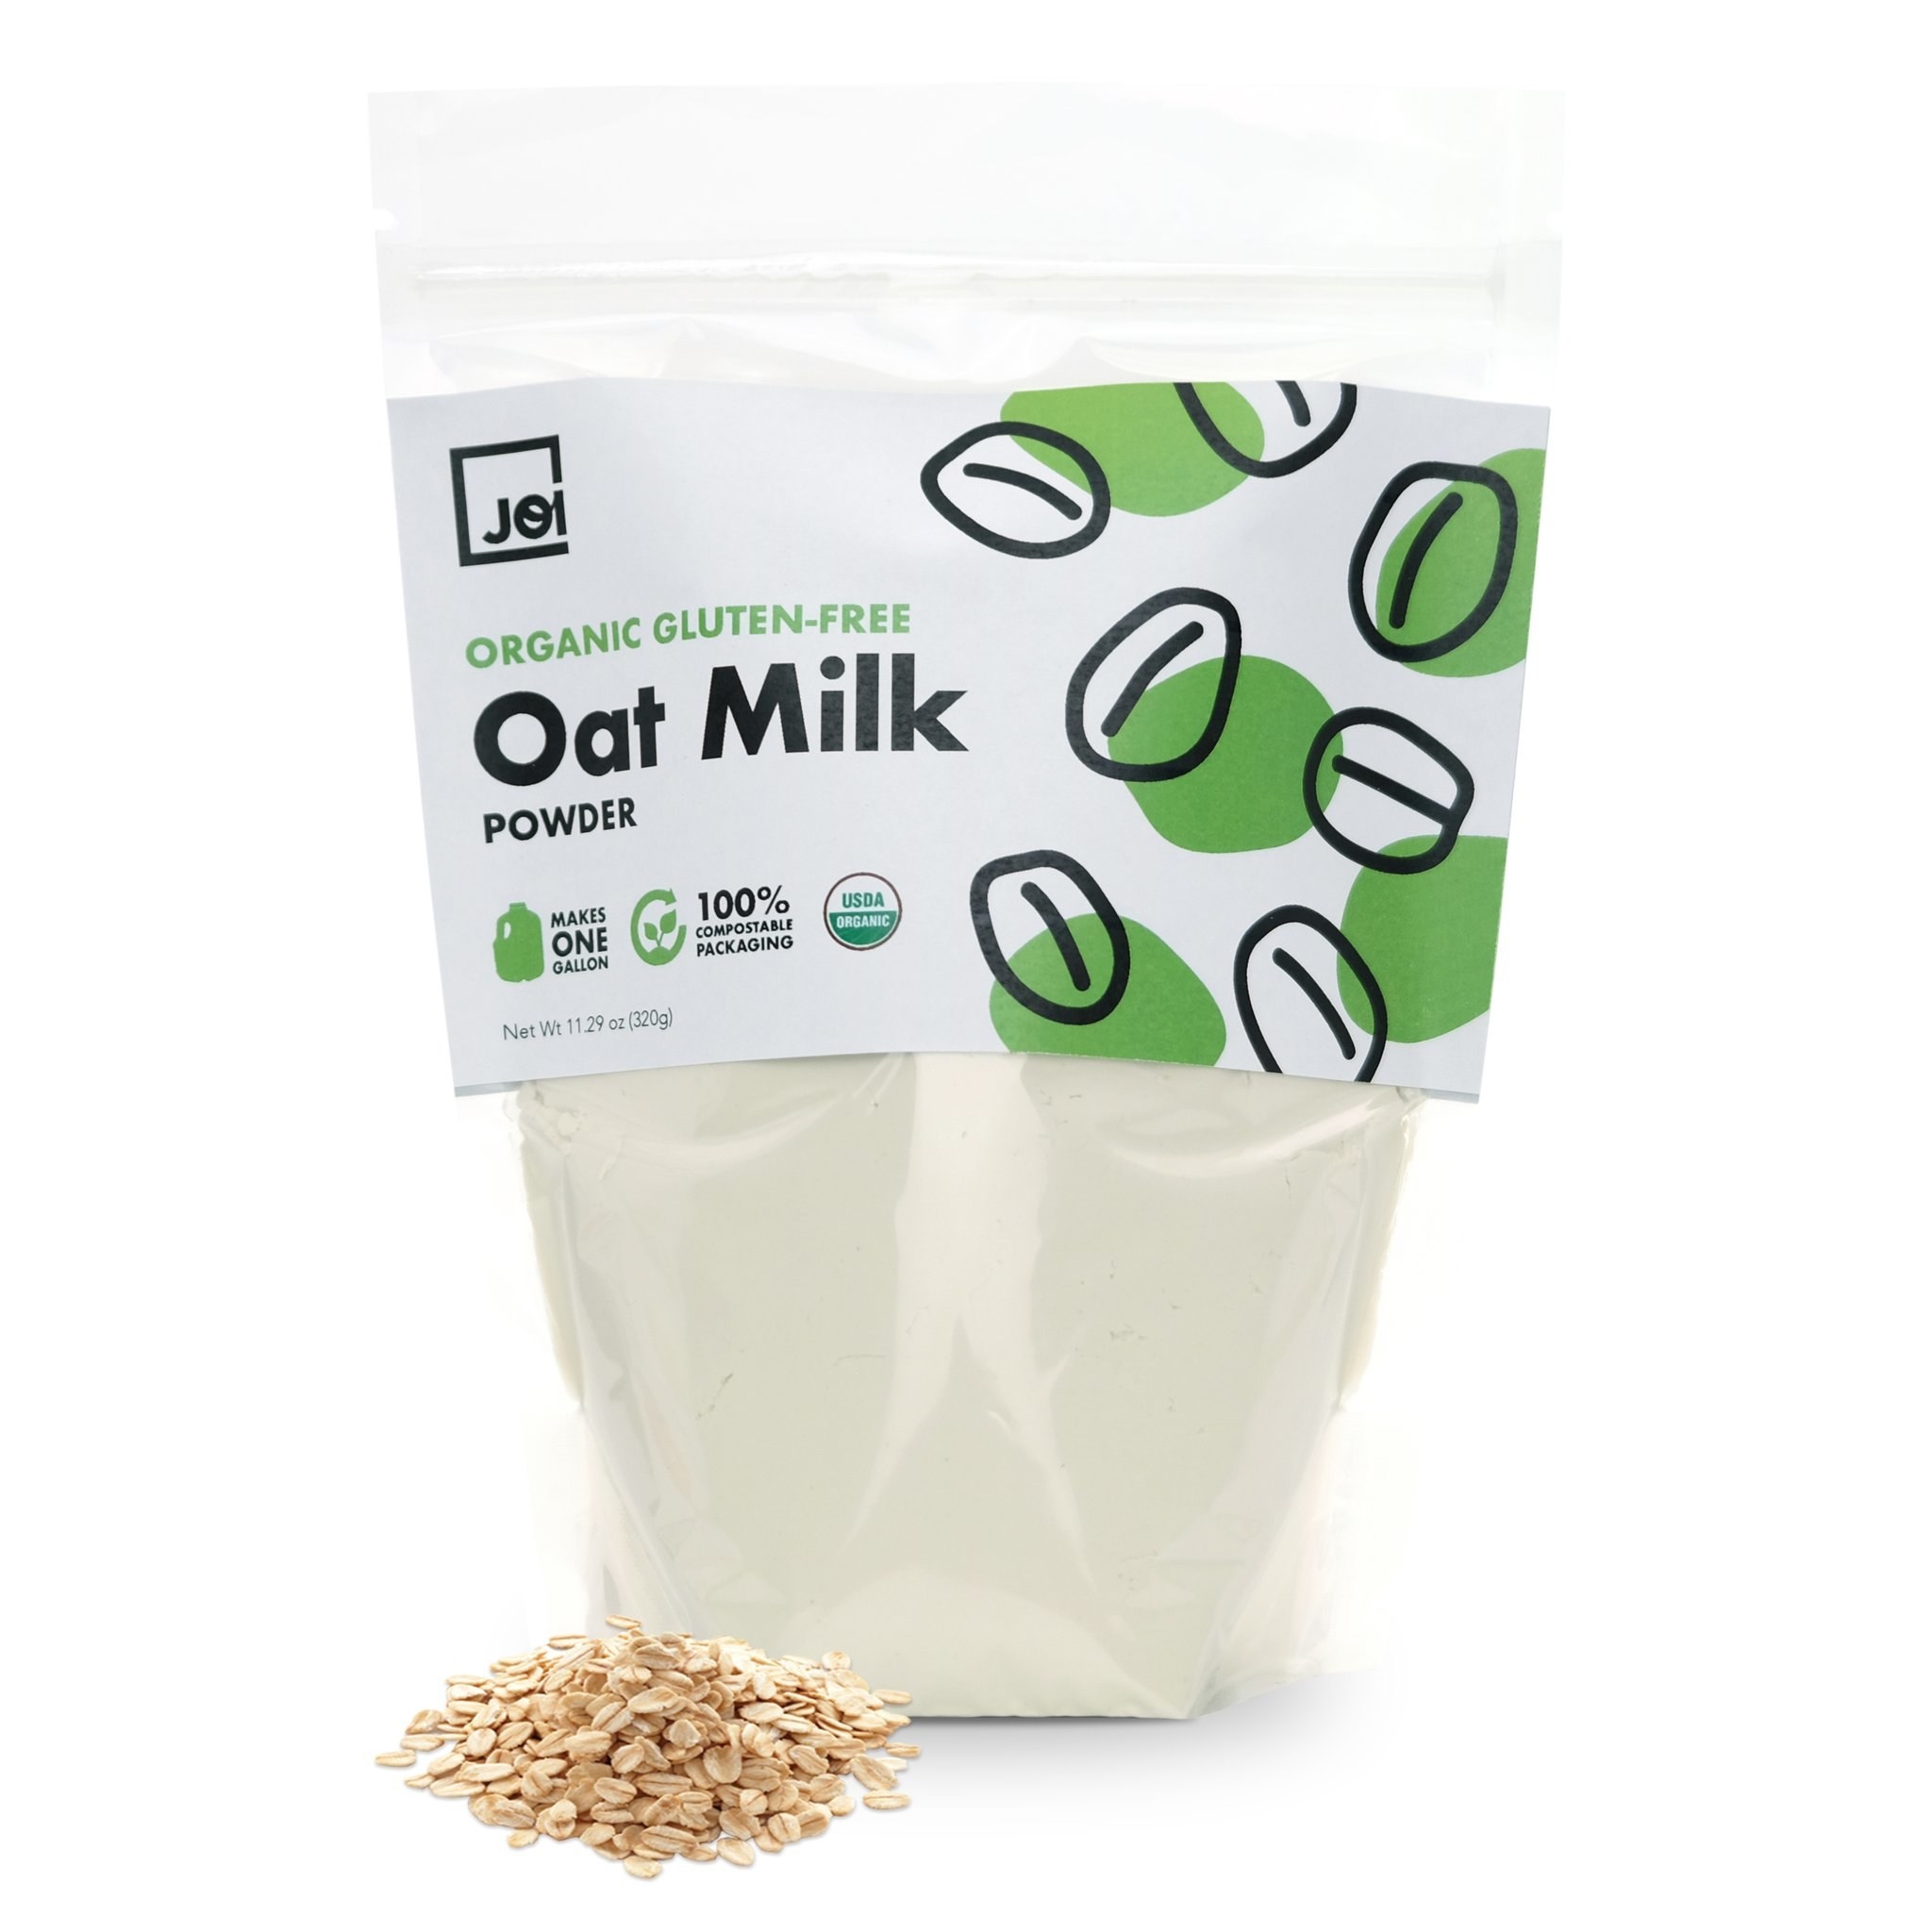 One package of organic, gluten-free Joi Oat Milk Powder with a small sample of the powder on the side